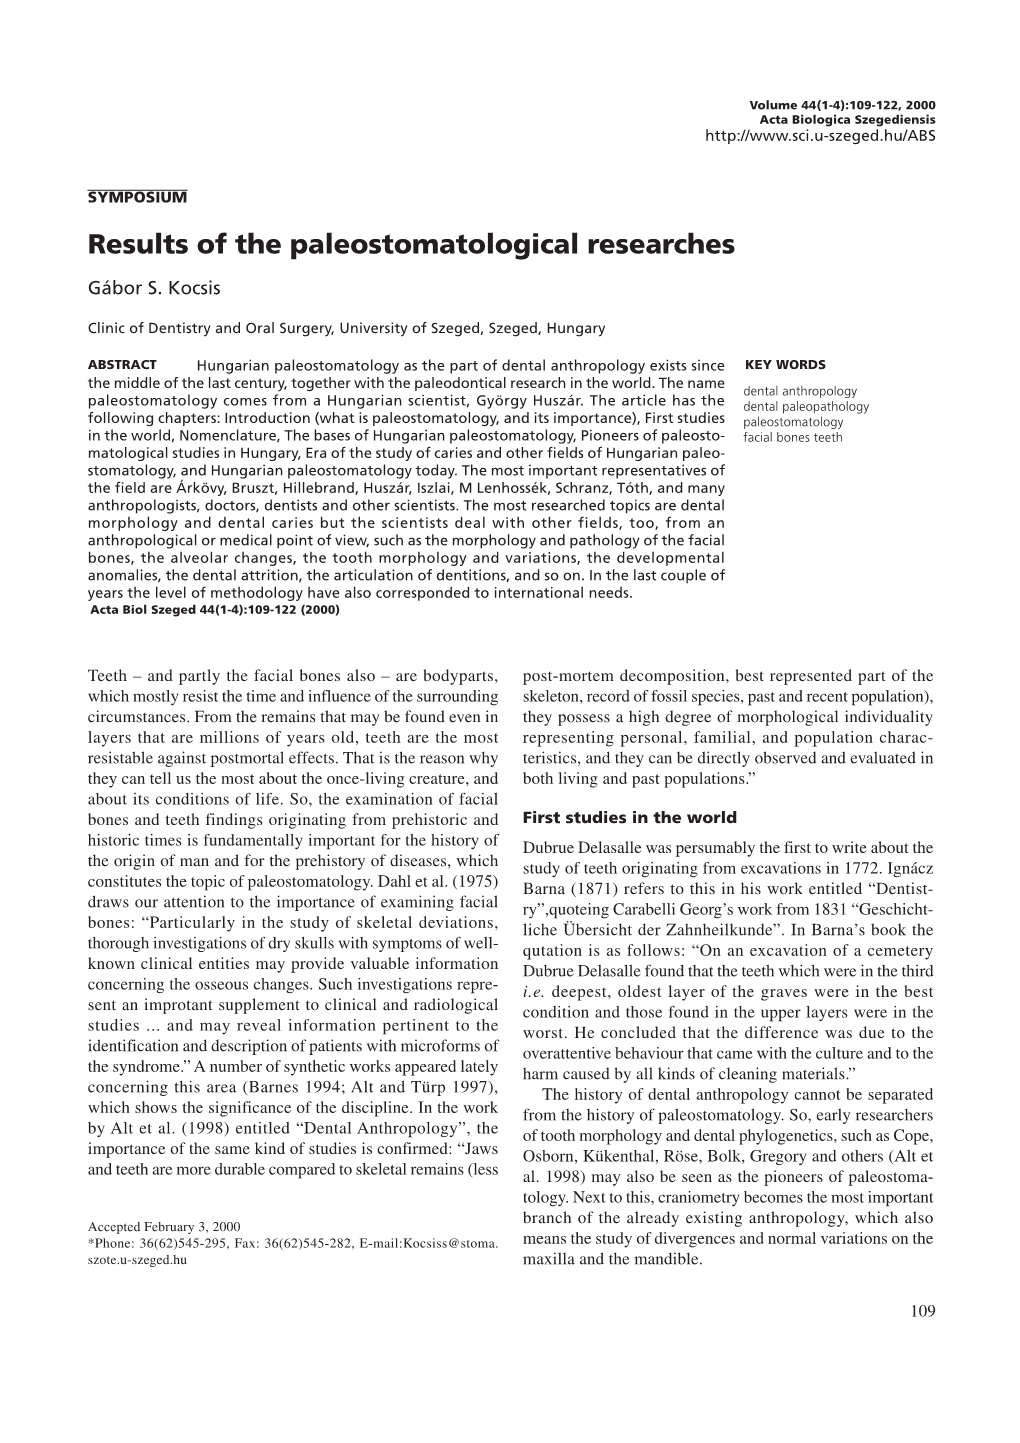 Results of the Paleostomatological Researches